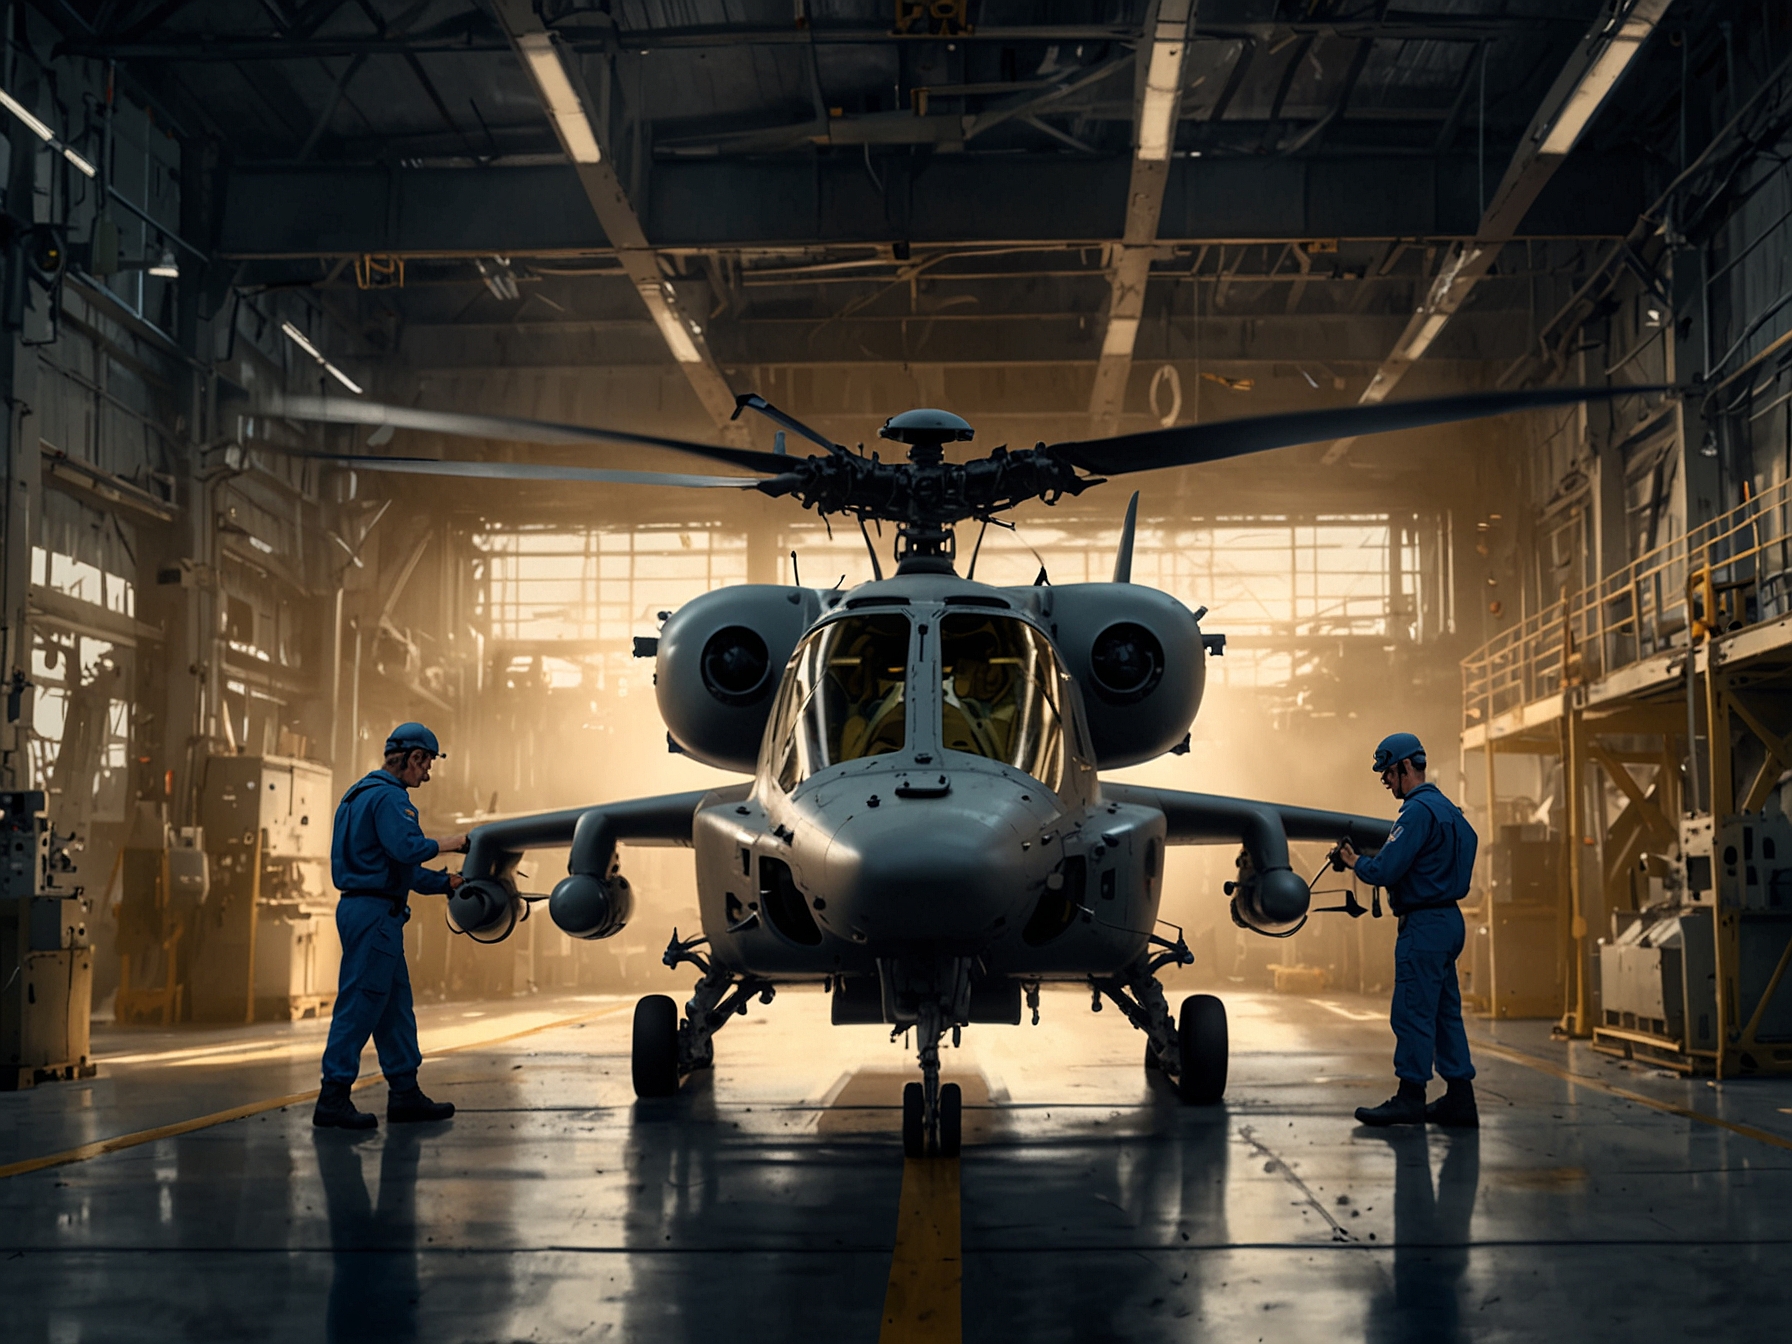 HAL's engineers working on the assembly line of the Light Combat Helicopter, showcasing the advanced manufacturing processes and technologies involved in creating this military aircraft.